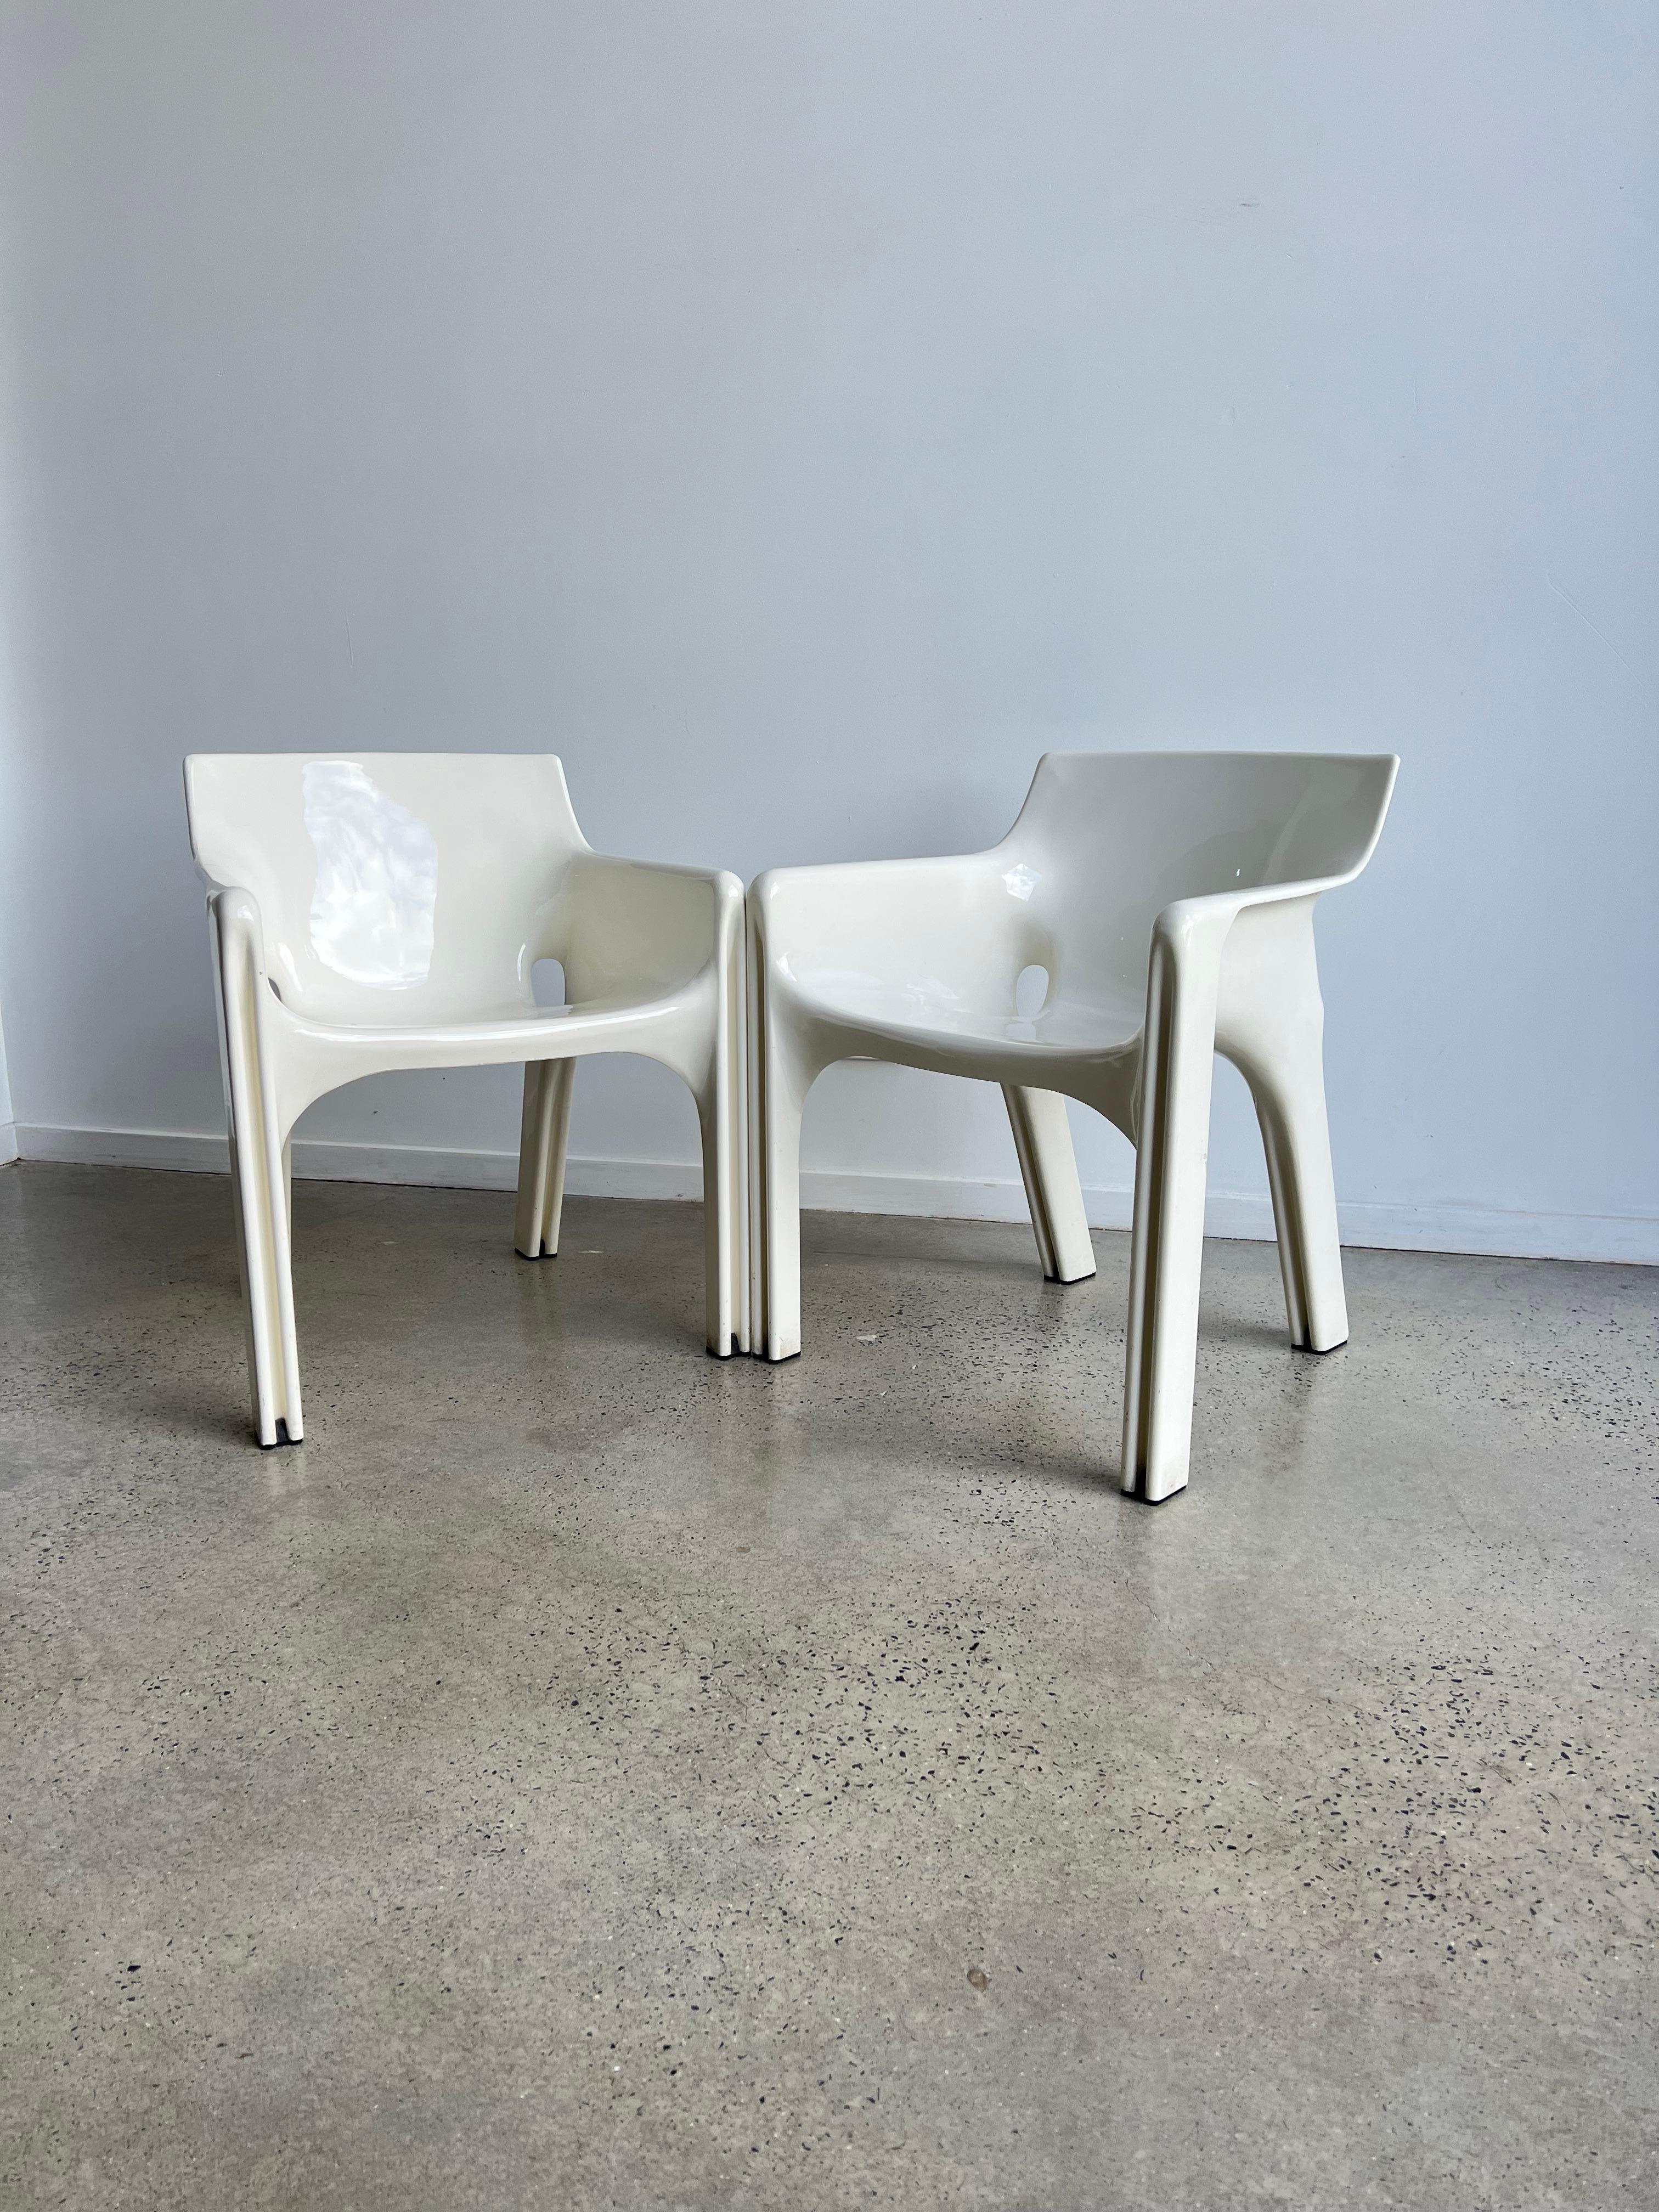 Space Age Dining Chairs by Vico Magistretti for Artemide model Gaudi 1970